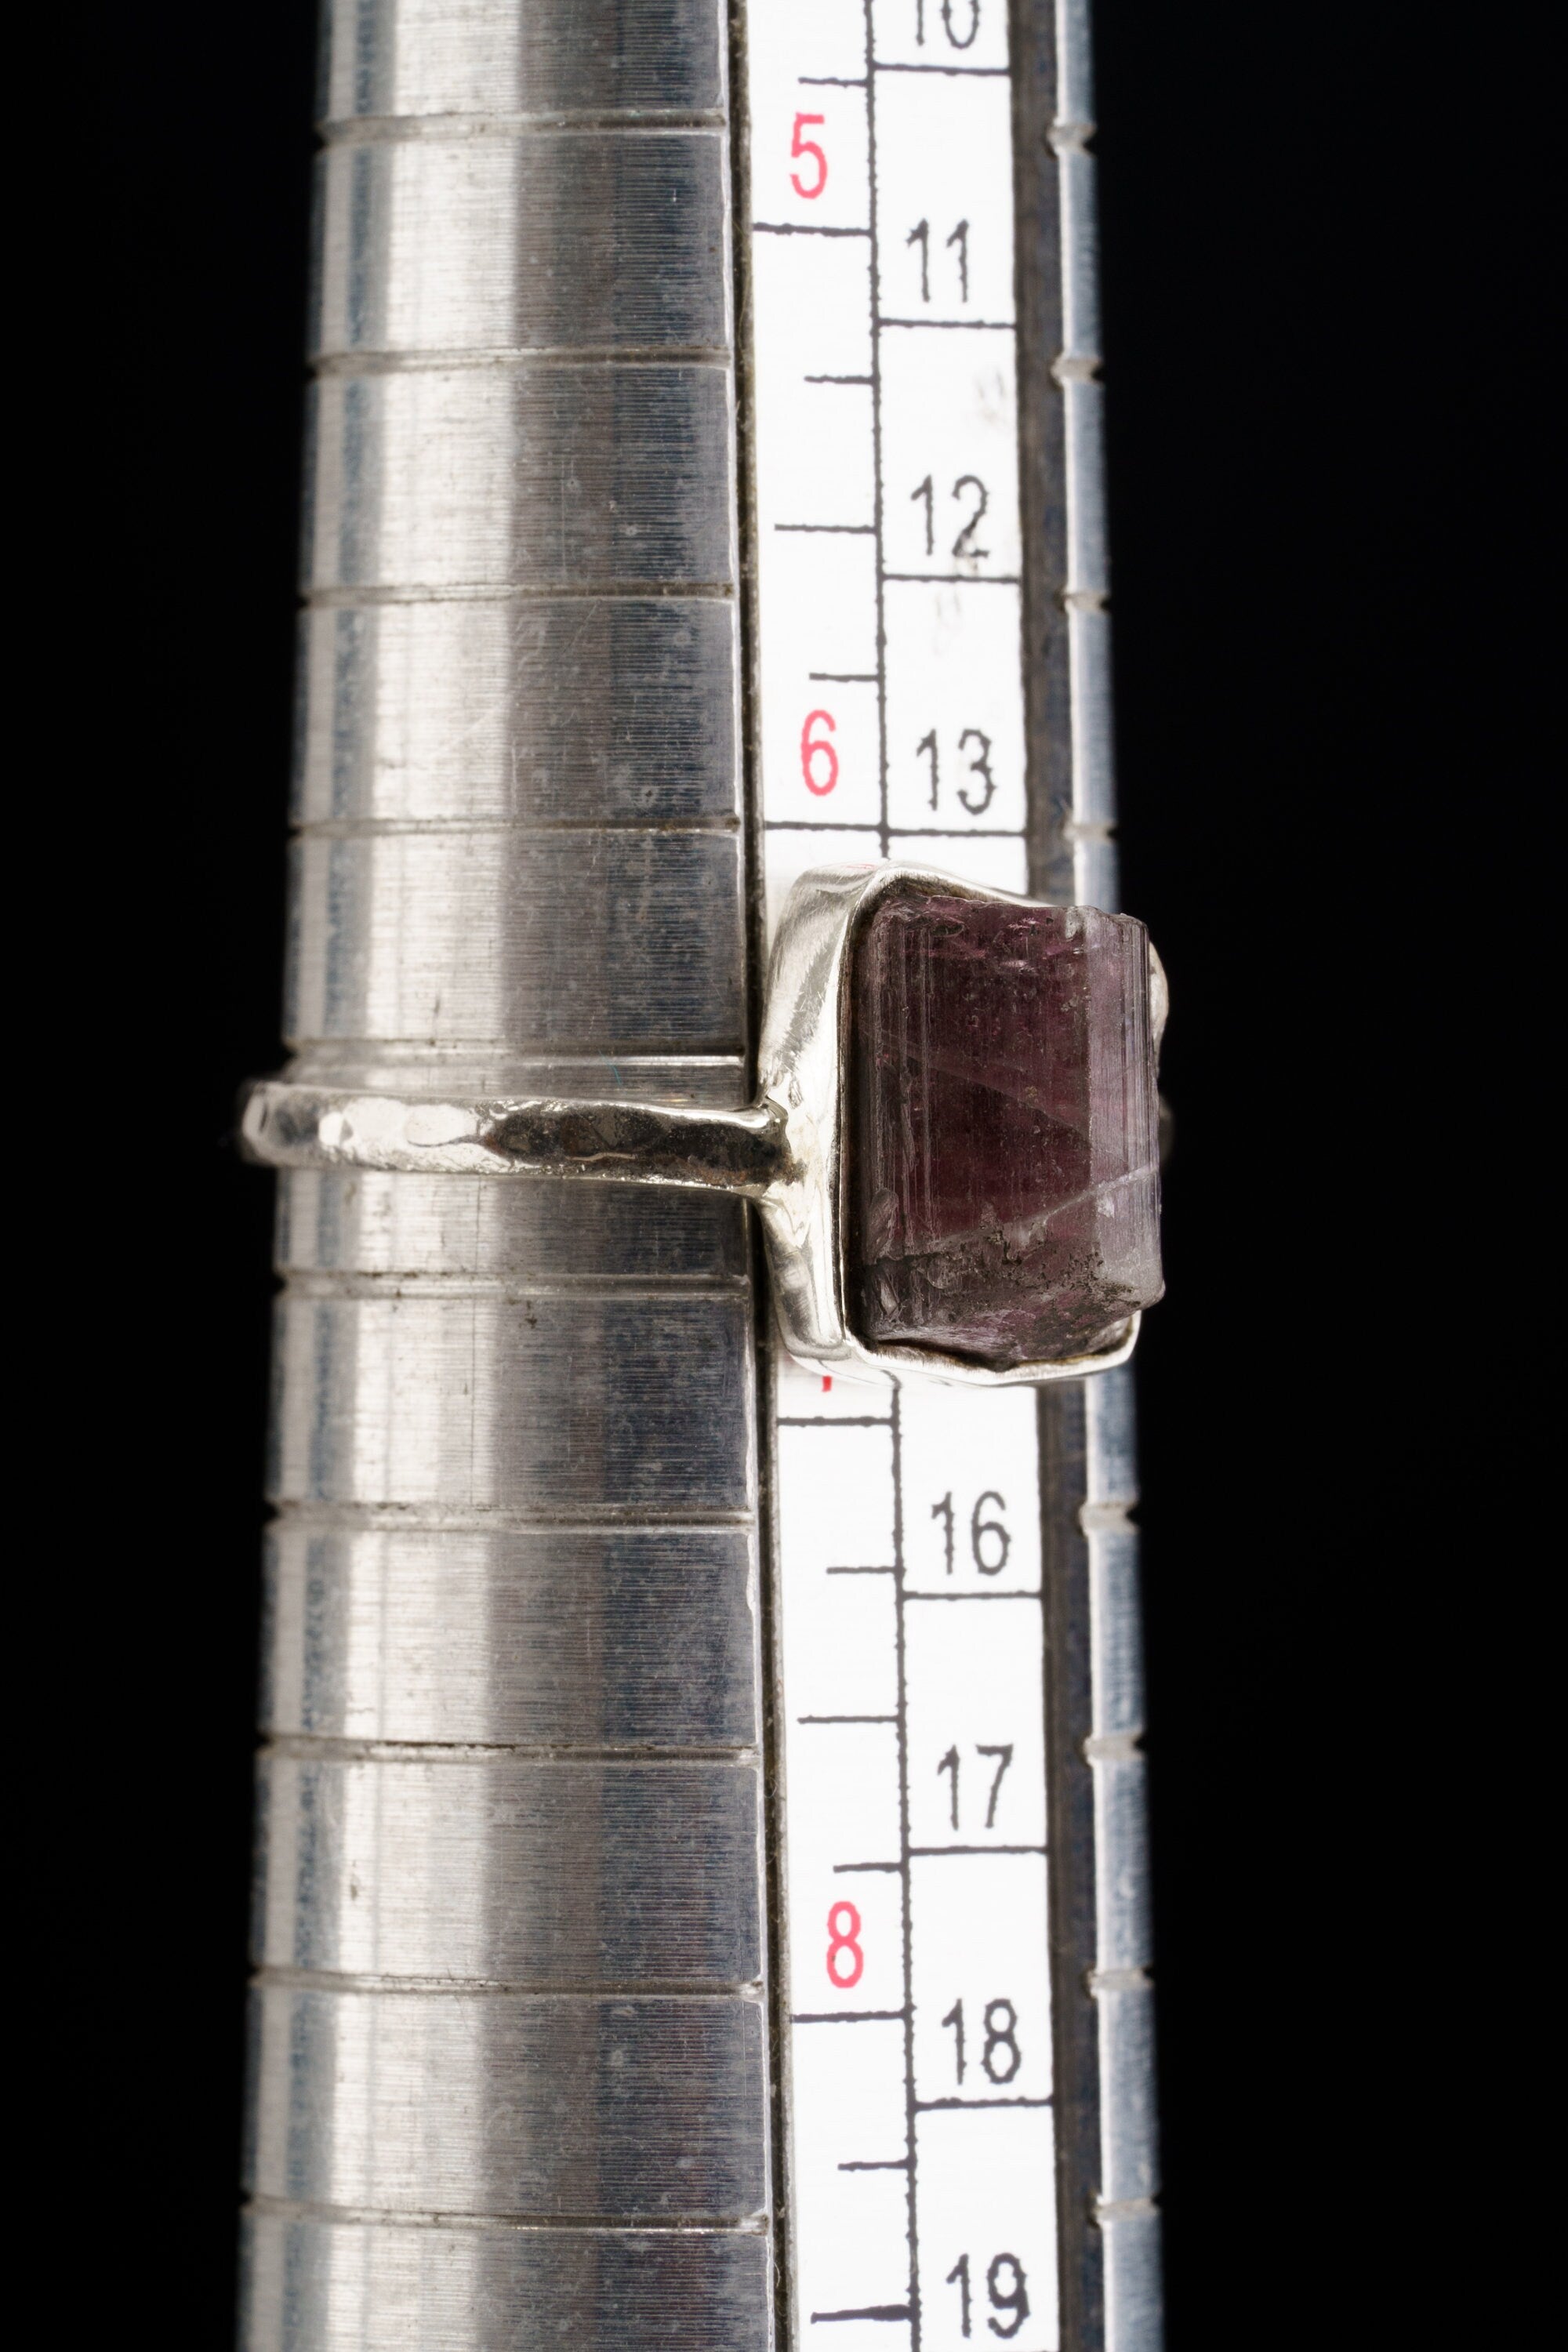 Pink gem Tourmaline Rubellite - Stack Crystal Ring - Size 4 3/4 US - 925 Sterling Silver - Thin Band Hammer Textured